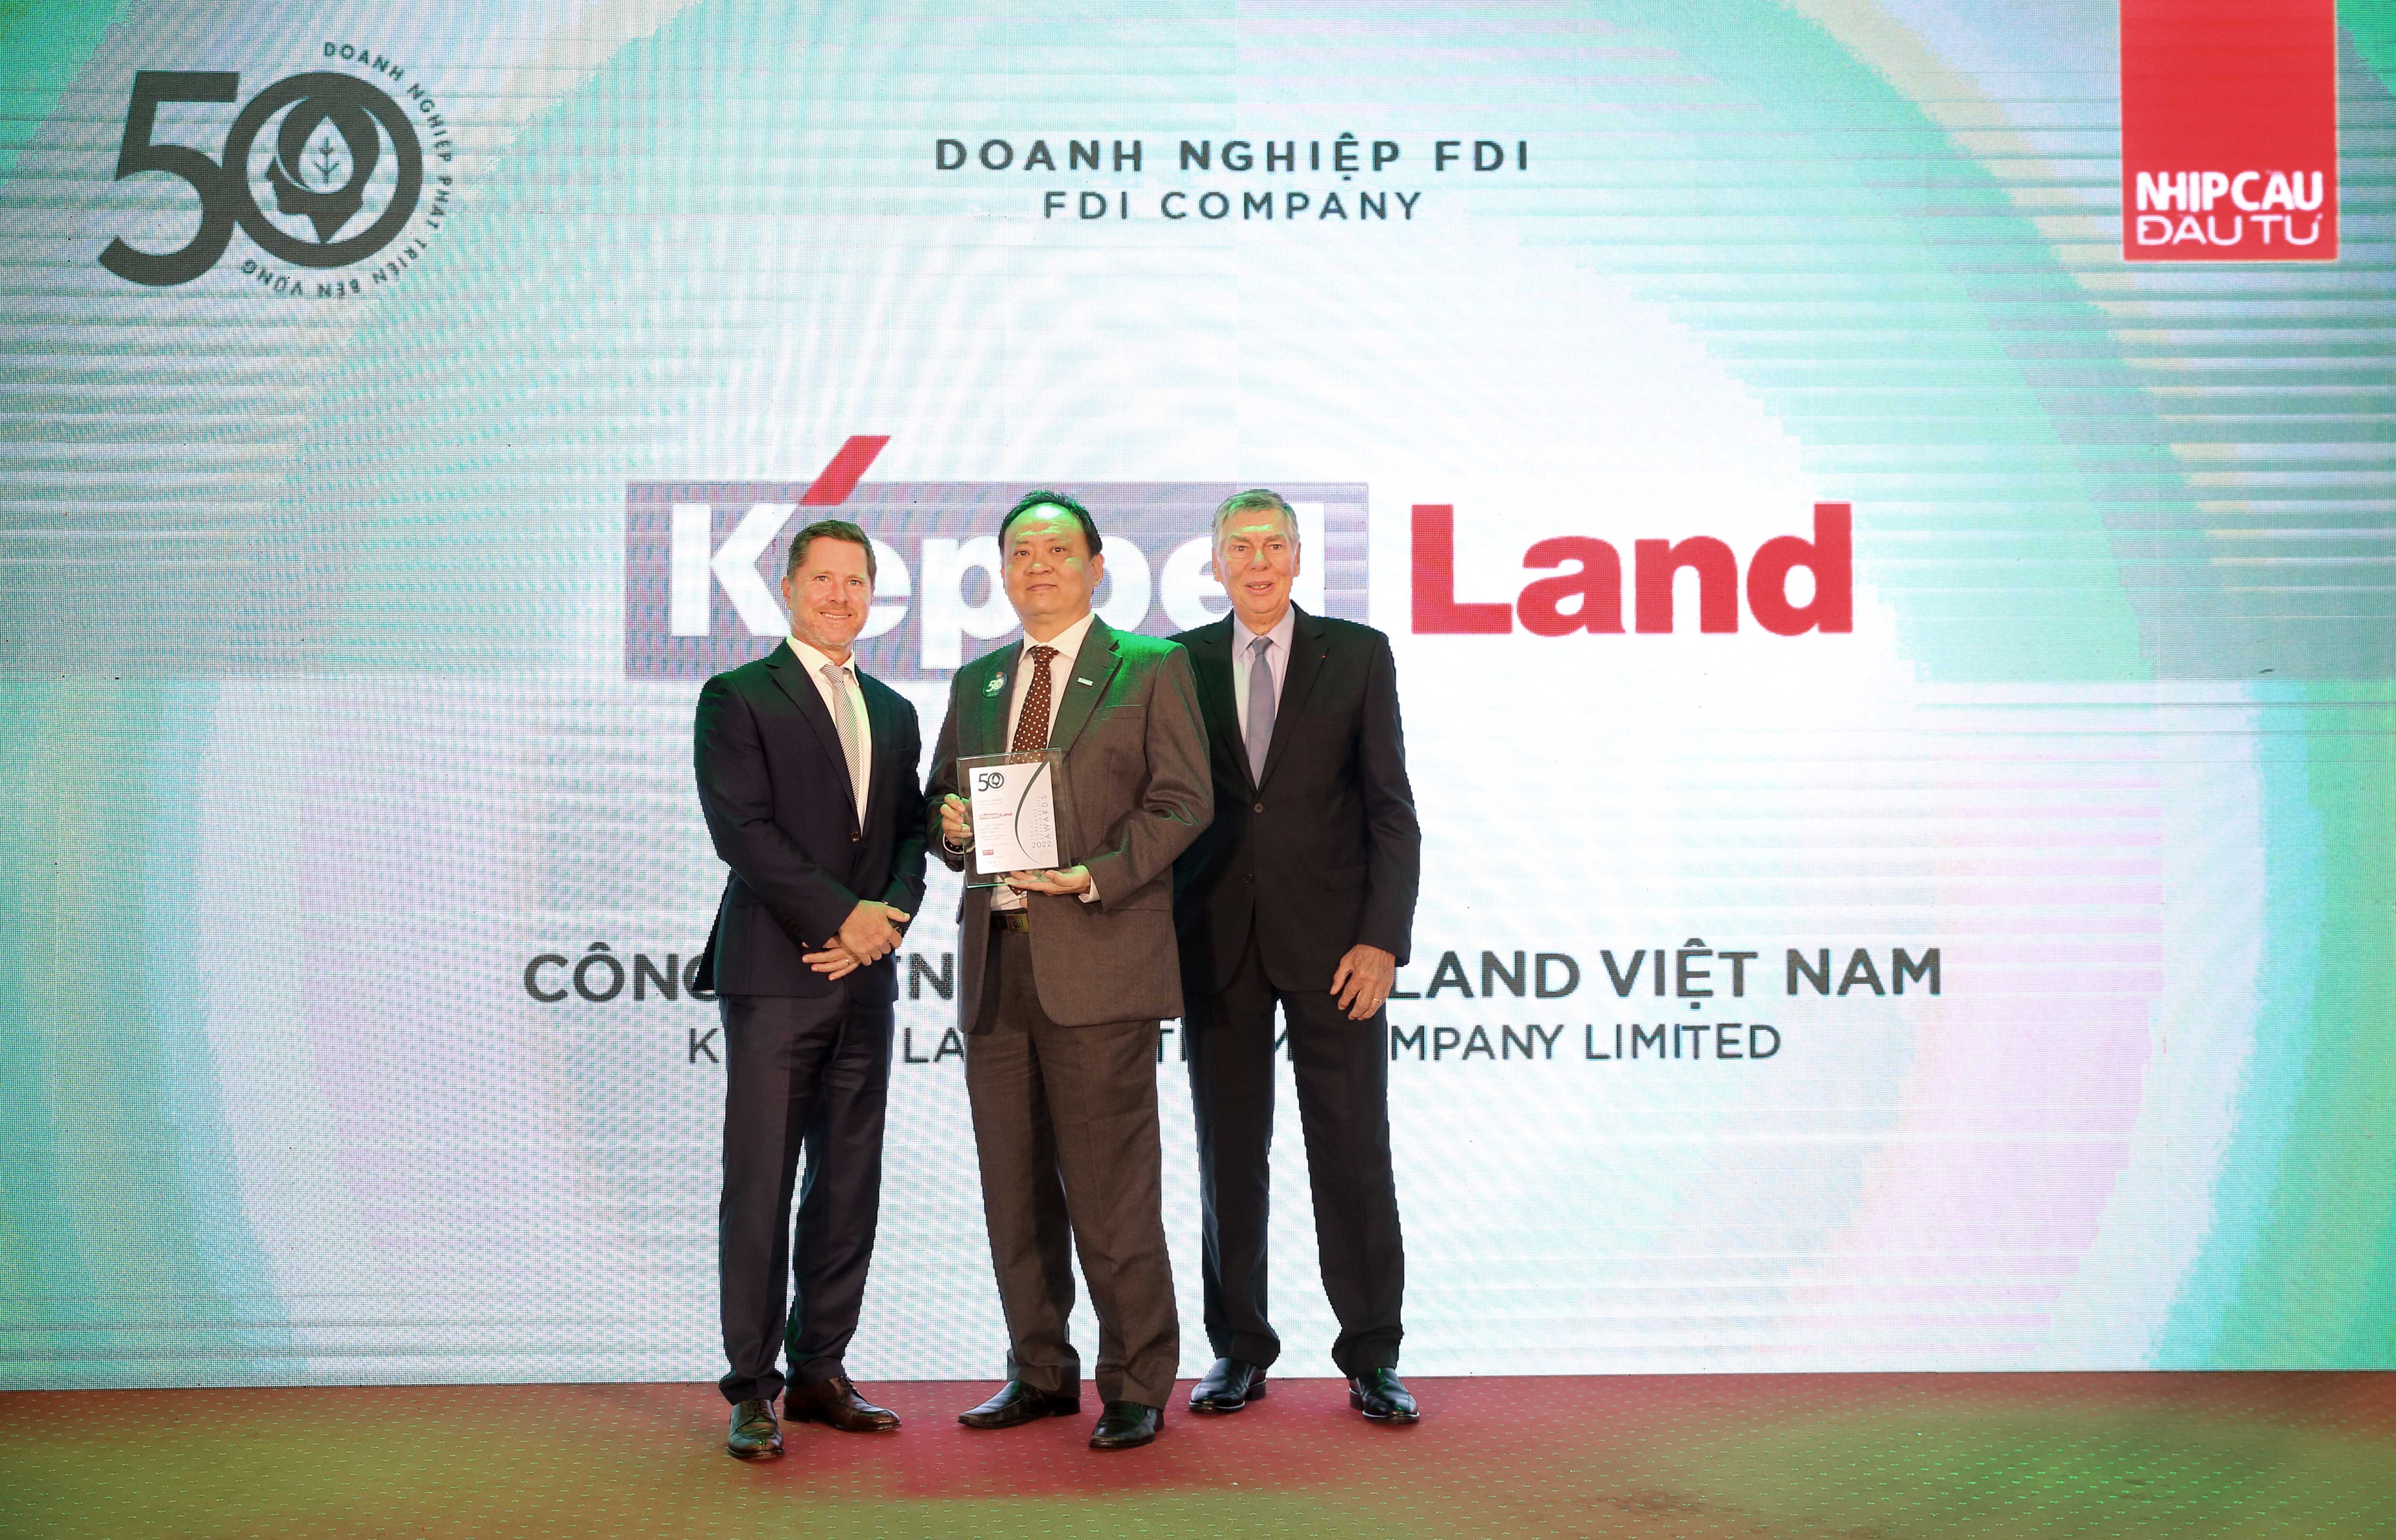 Mr John Lee (middle), Chief Financial Officer of Keppel Land Vietnam, received the “Top Sustainable Development Companies in Vietnam” award on behalf of Keppel Land Vietnam.